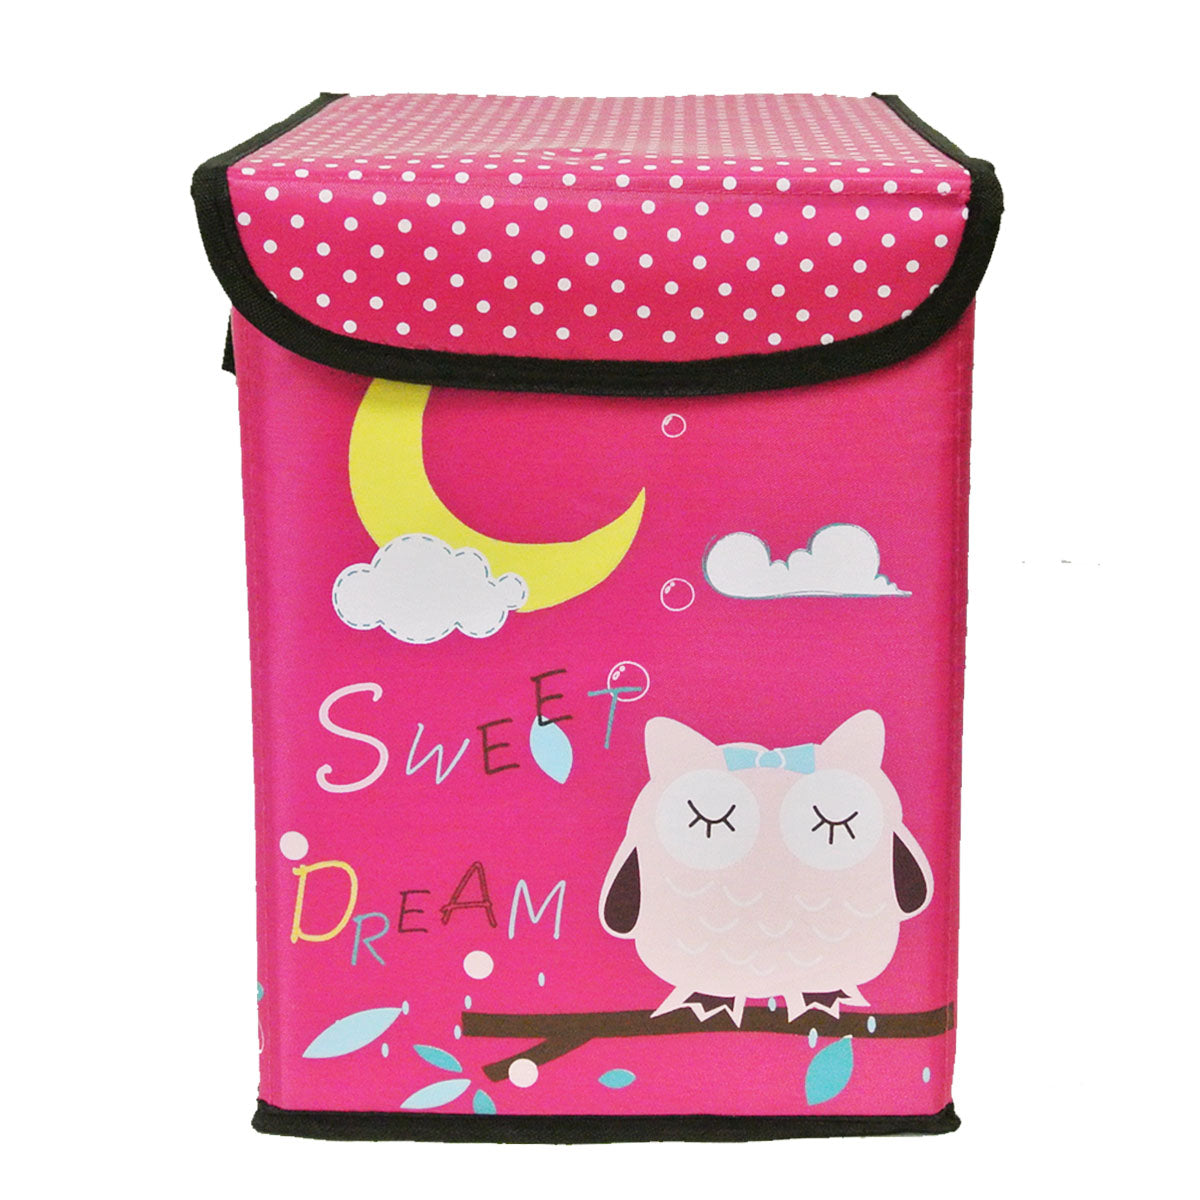 Children's Owl Fabric Storage Bin for Clothes and Toys